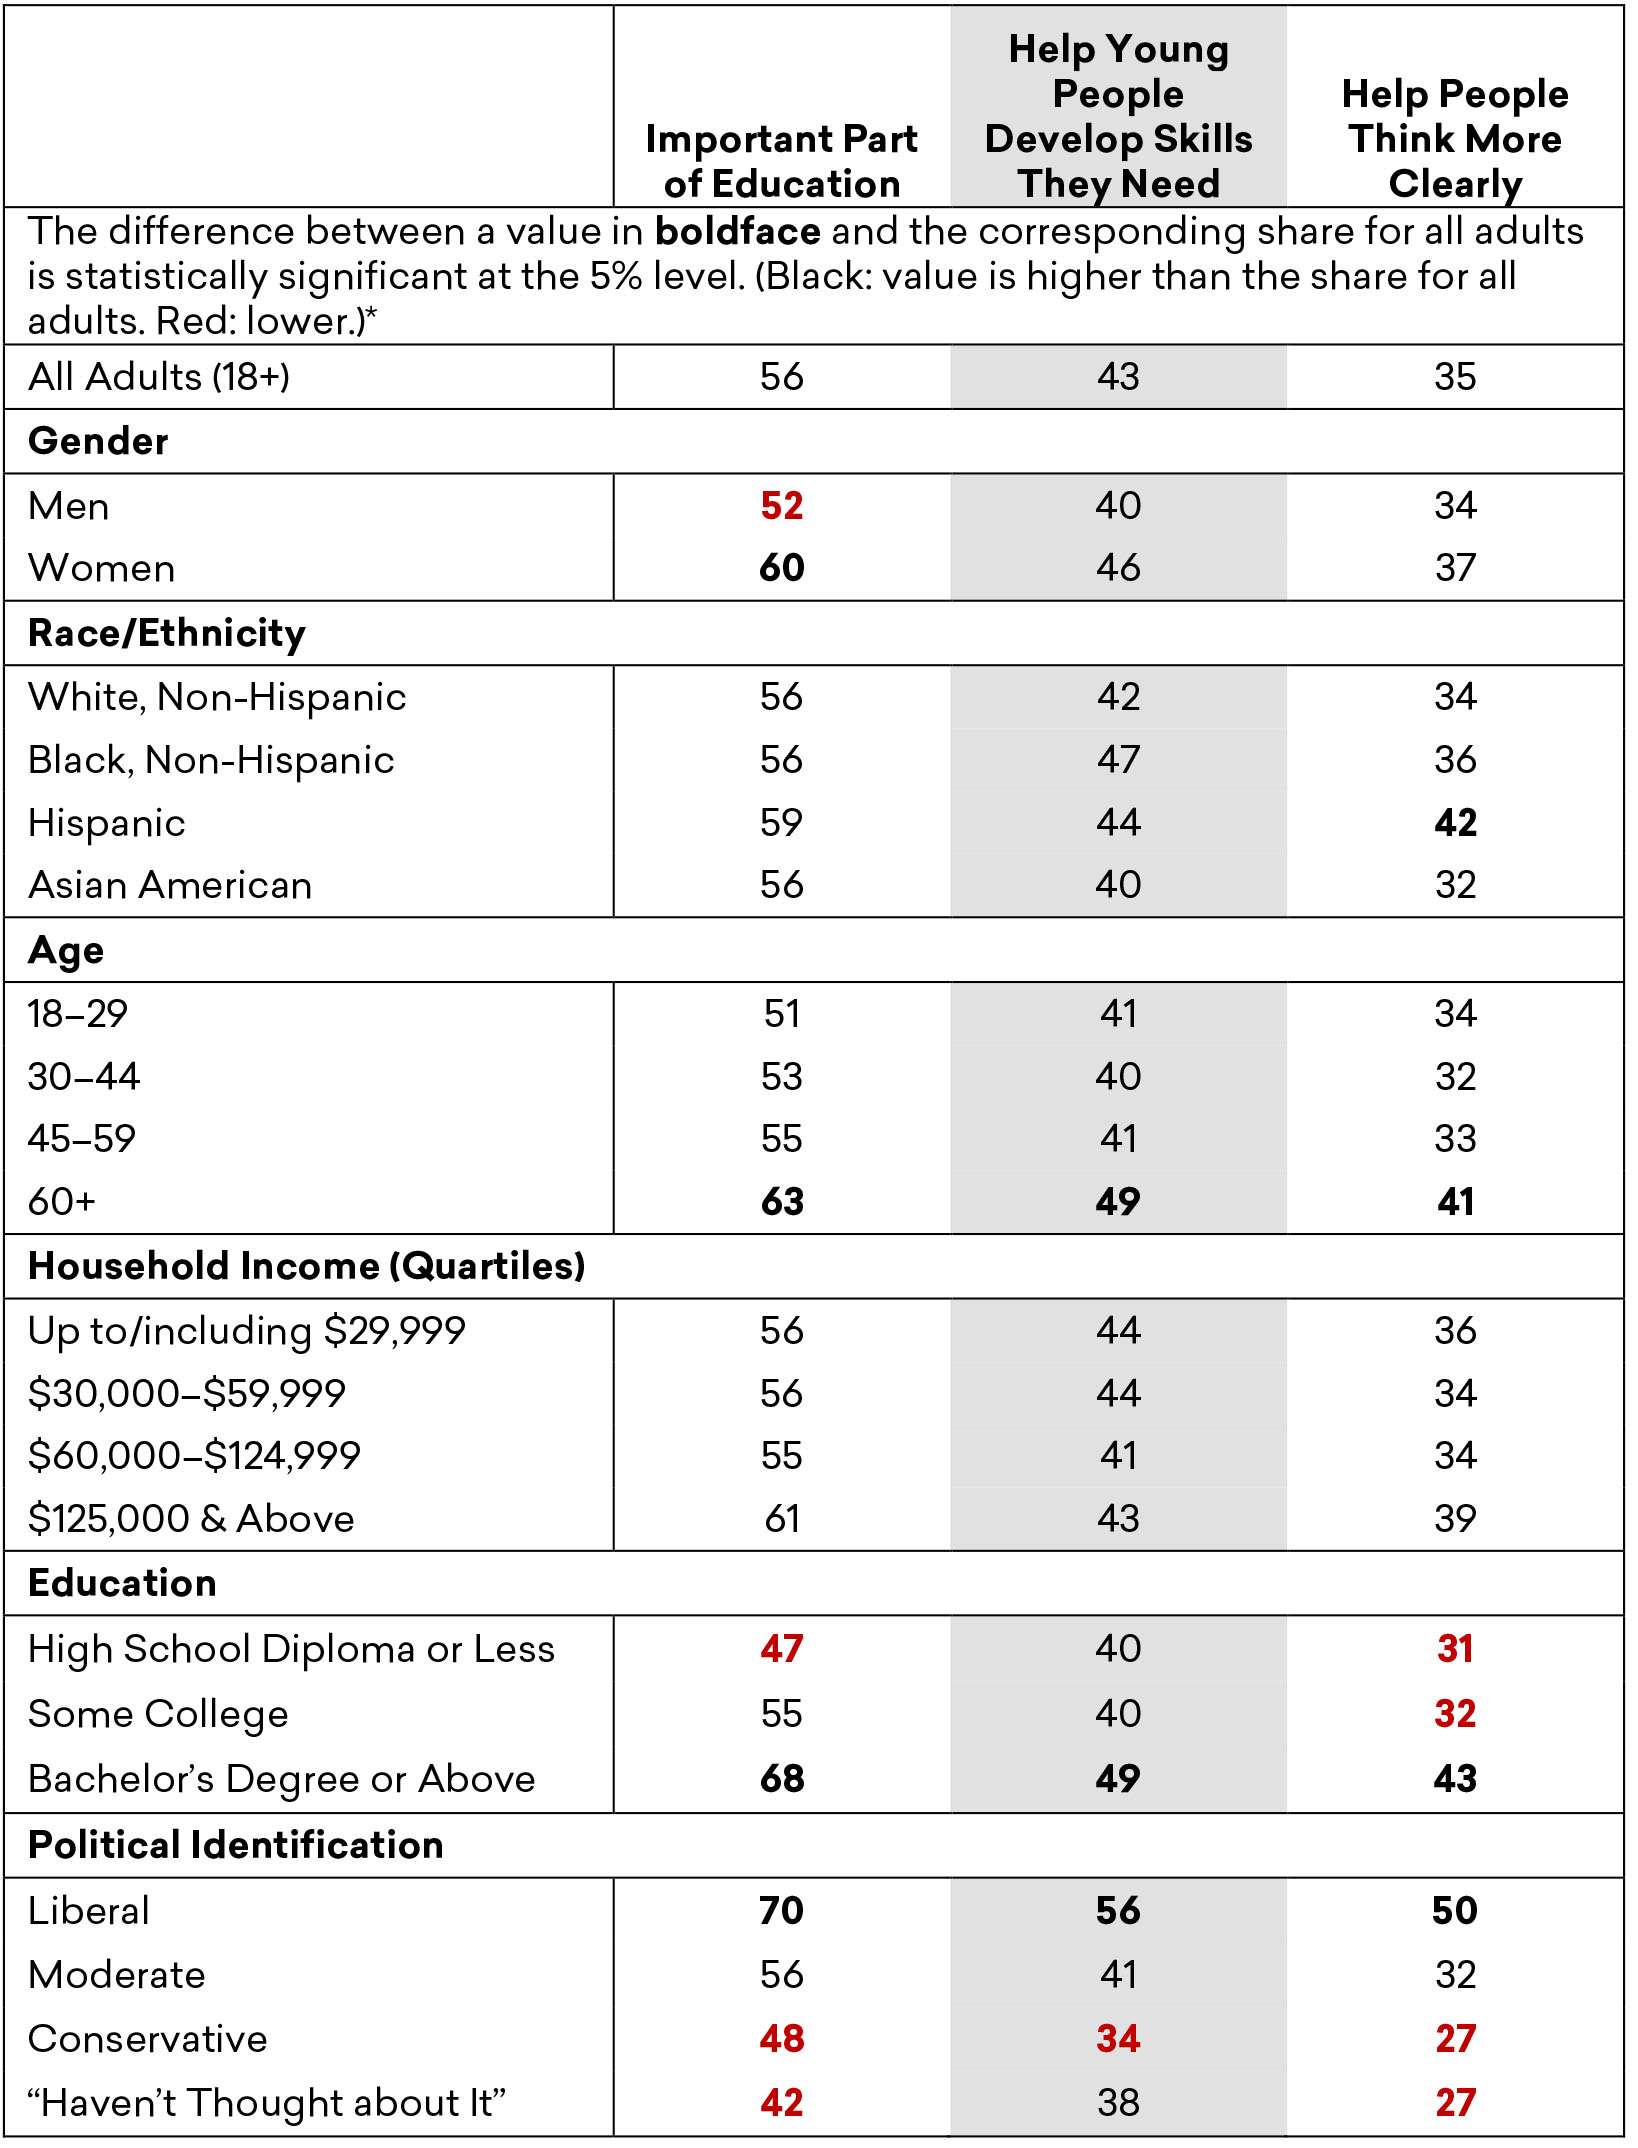 Estimated Share of Adults Who Strongly Agree with Statements about the Educational Benefits of the Humanities, by Demographic Group, Fall 2019